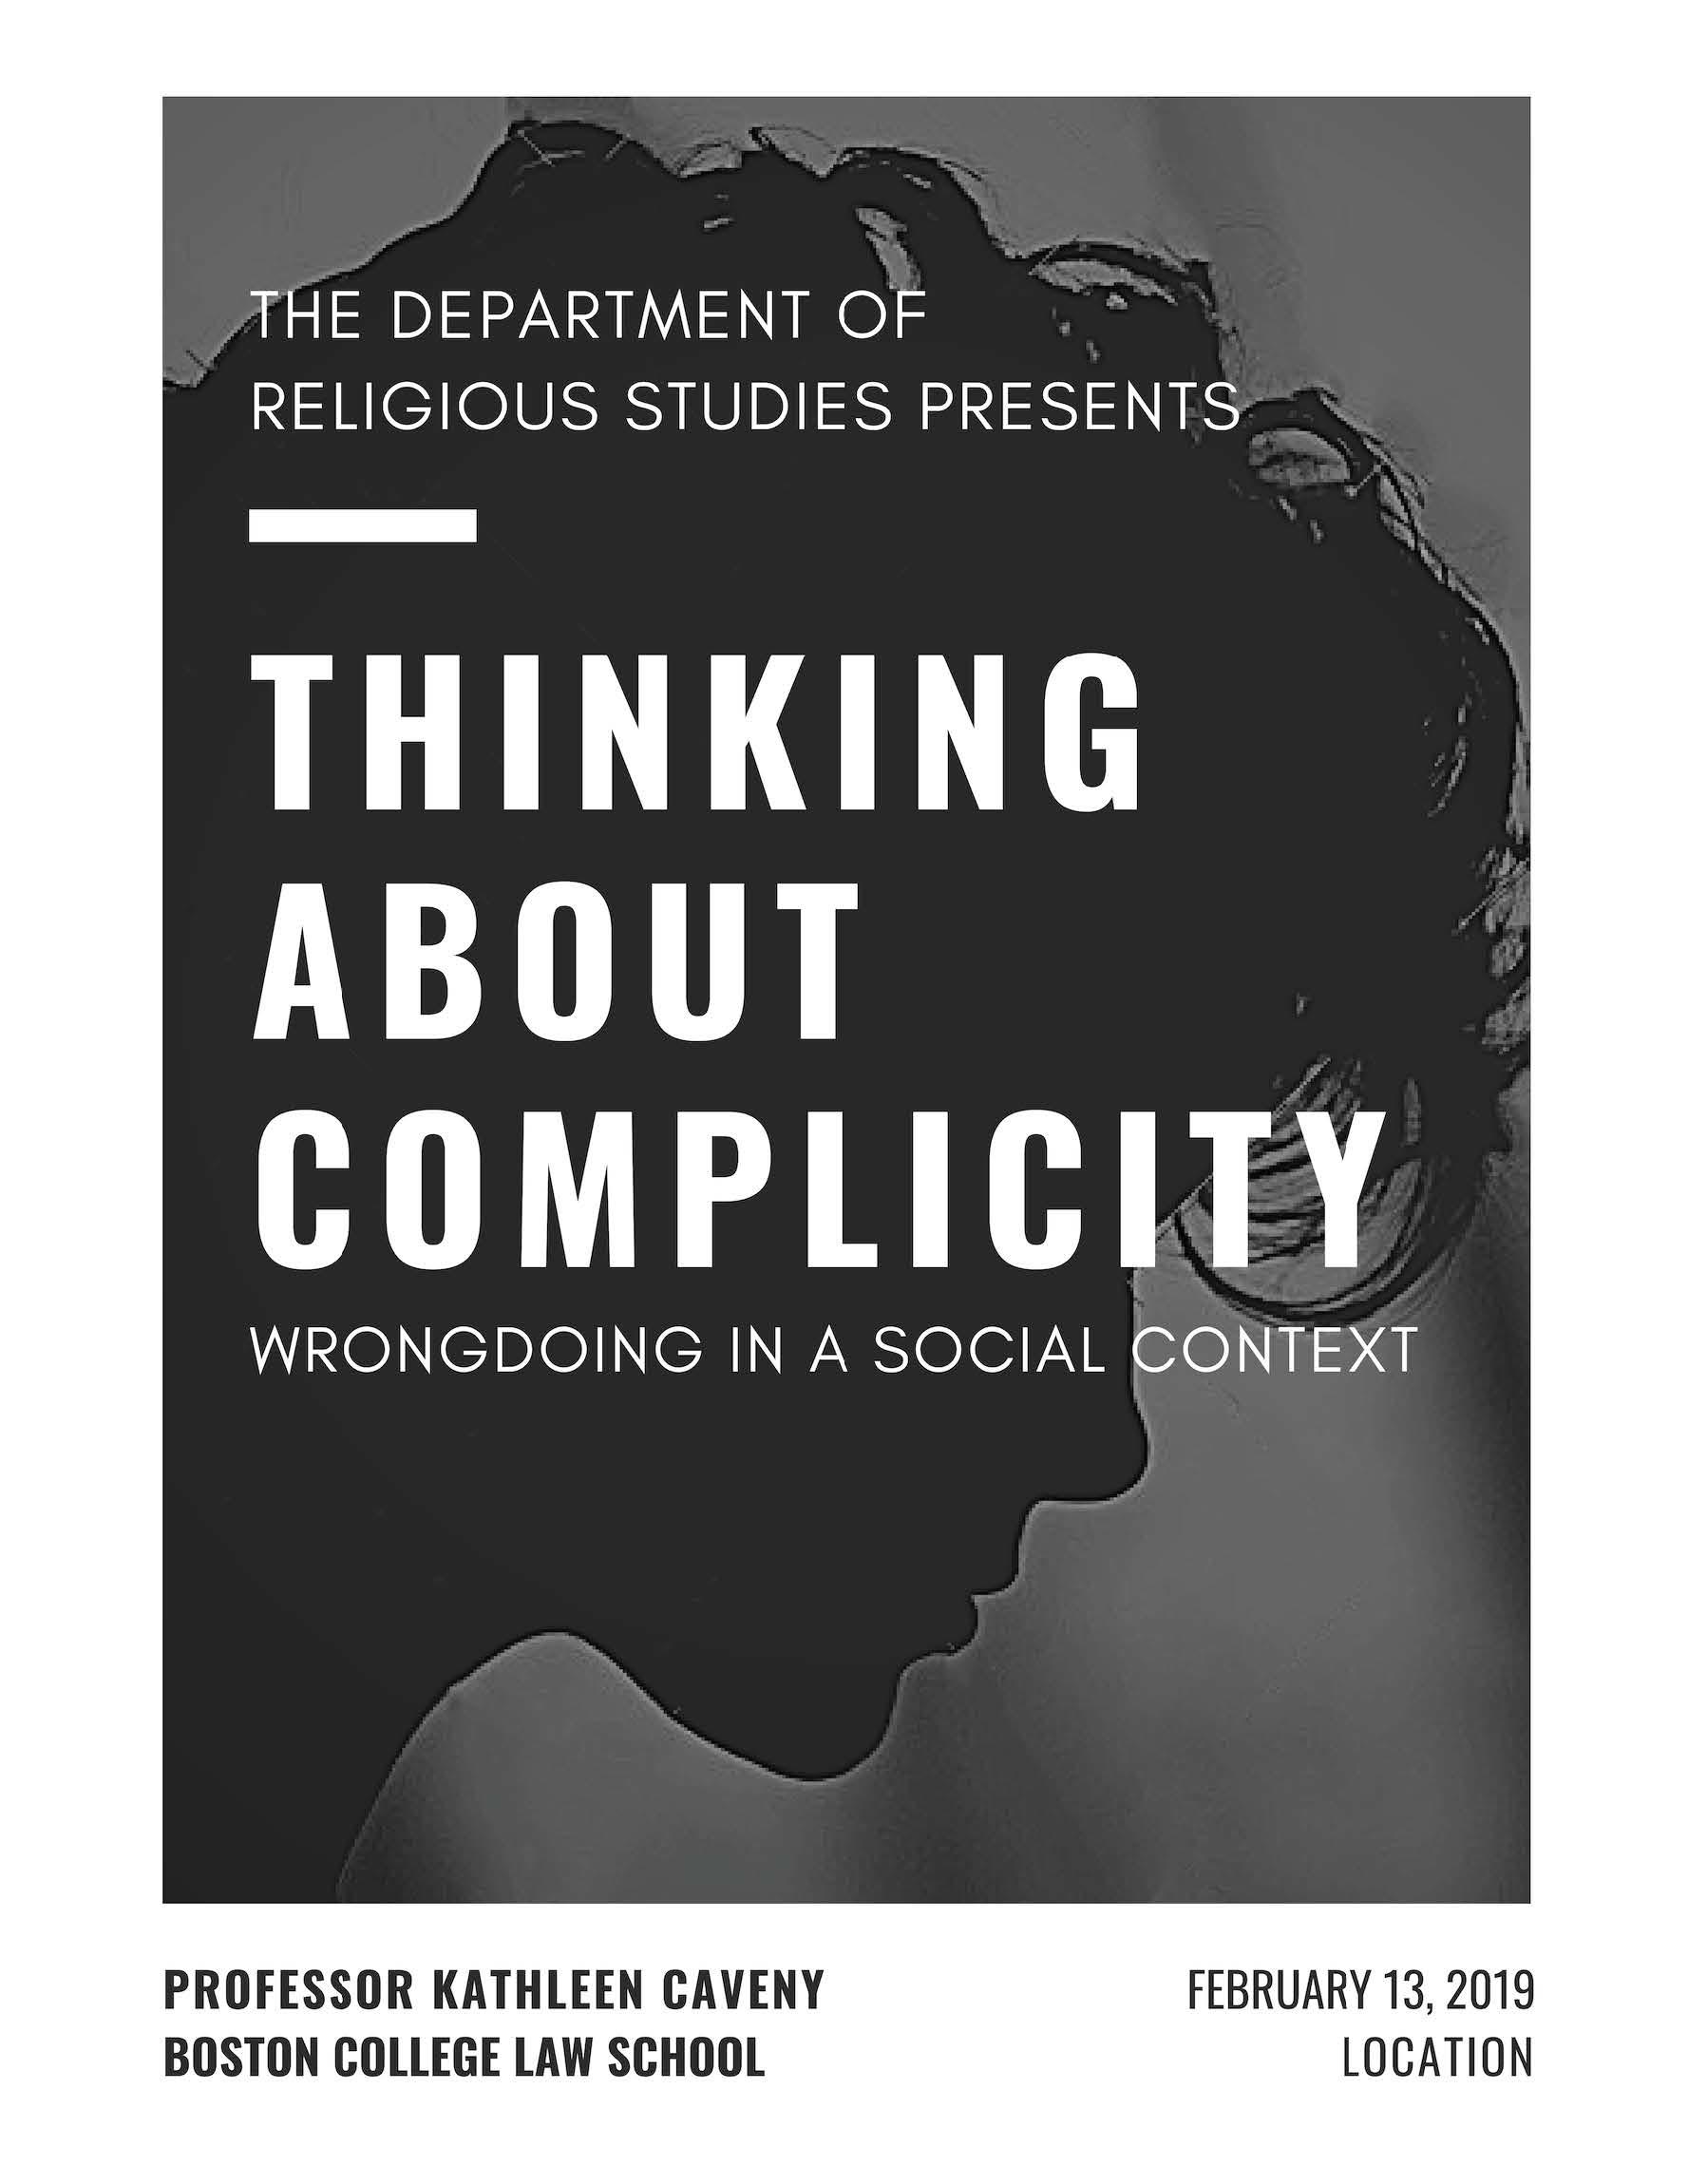 Publicity poster for "Thinking About Complicity" event